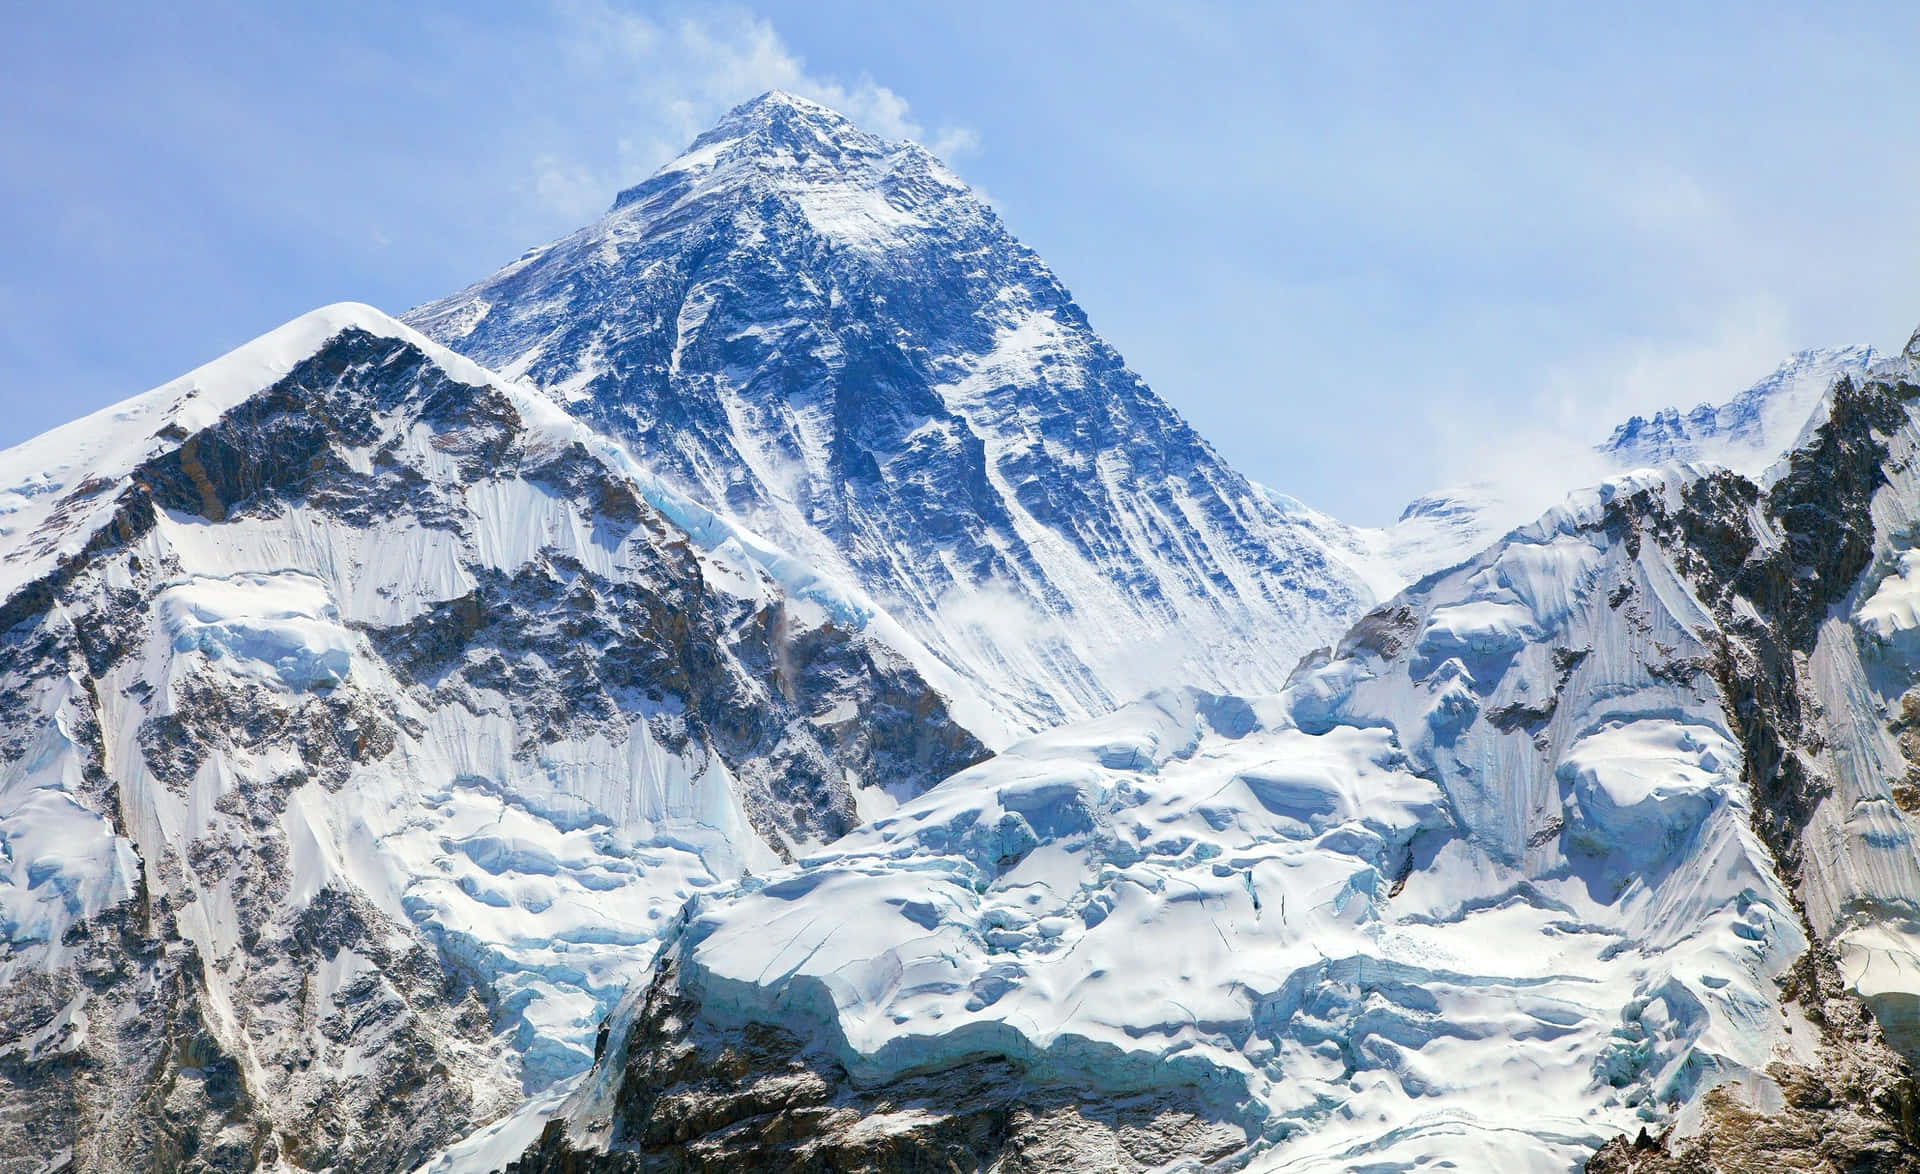 The beauty of the mighty Mount Everest